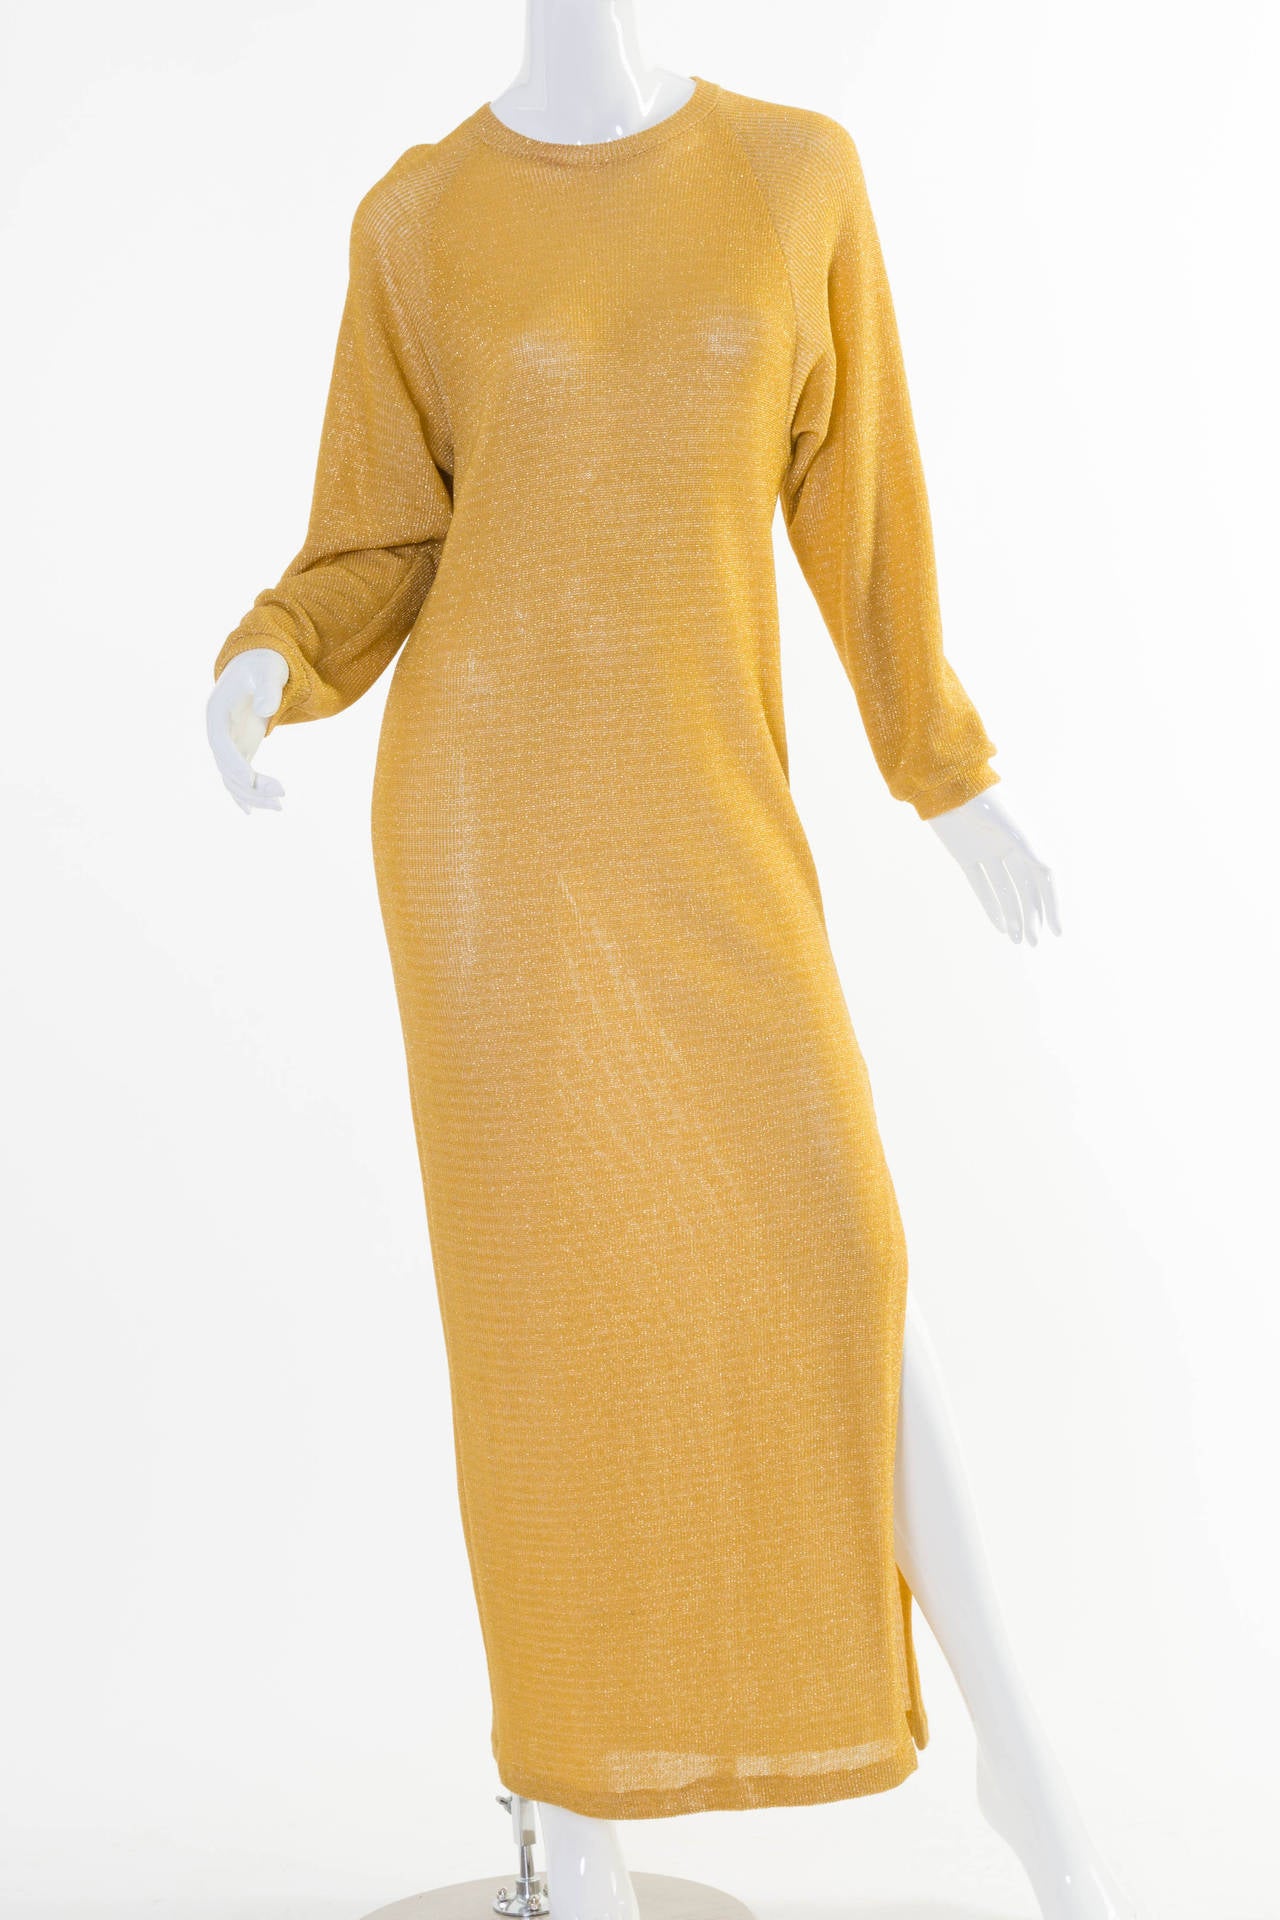 Bill Blass column maxi dress with a round neckline long sleeves and a slit on the left side of the gown. Made of a metallic gold knit with a generous amount of stretch to it. 

Bust: 36 inches 
Waist: 38 inches 
Hips: 38 inches 
Shoulders side